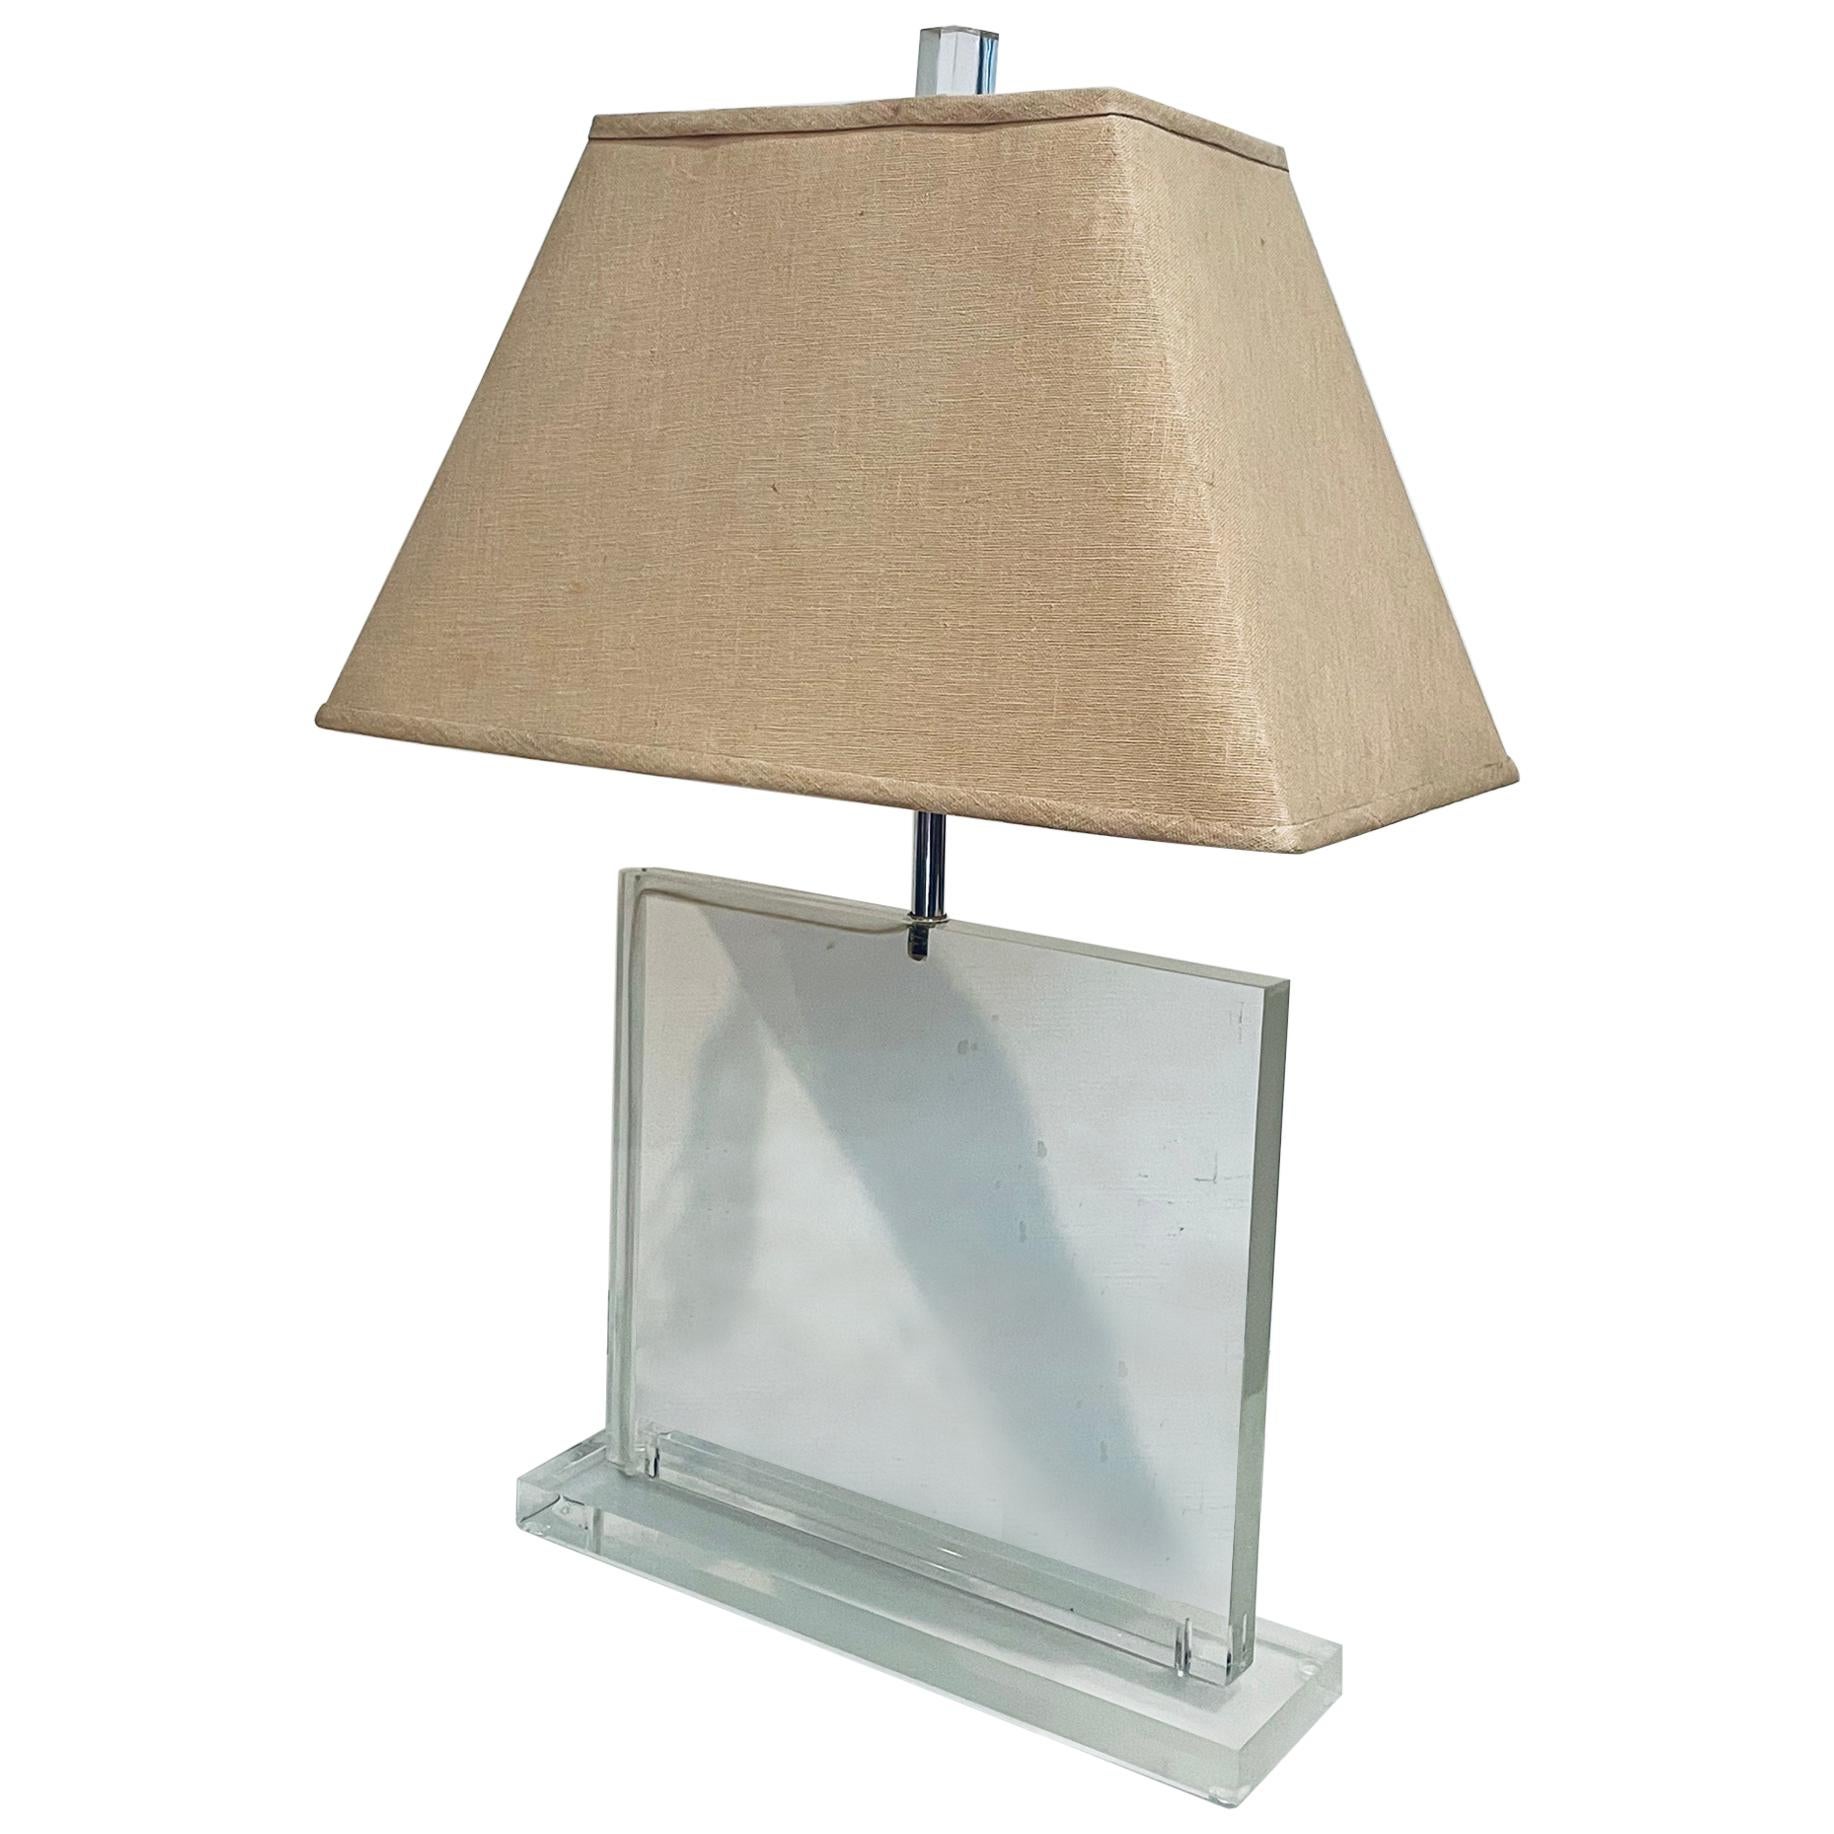 Solid Square Lucite Table / Desk Lamp